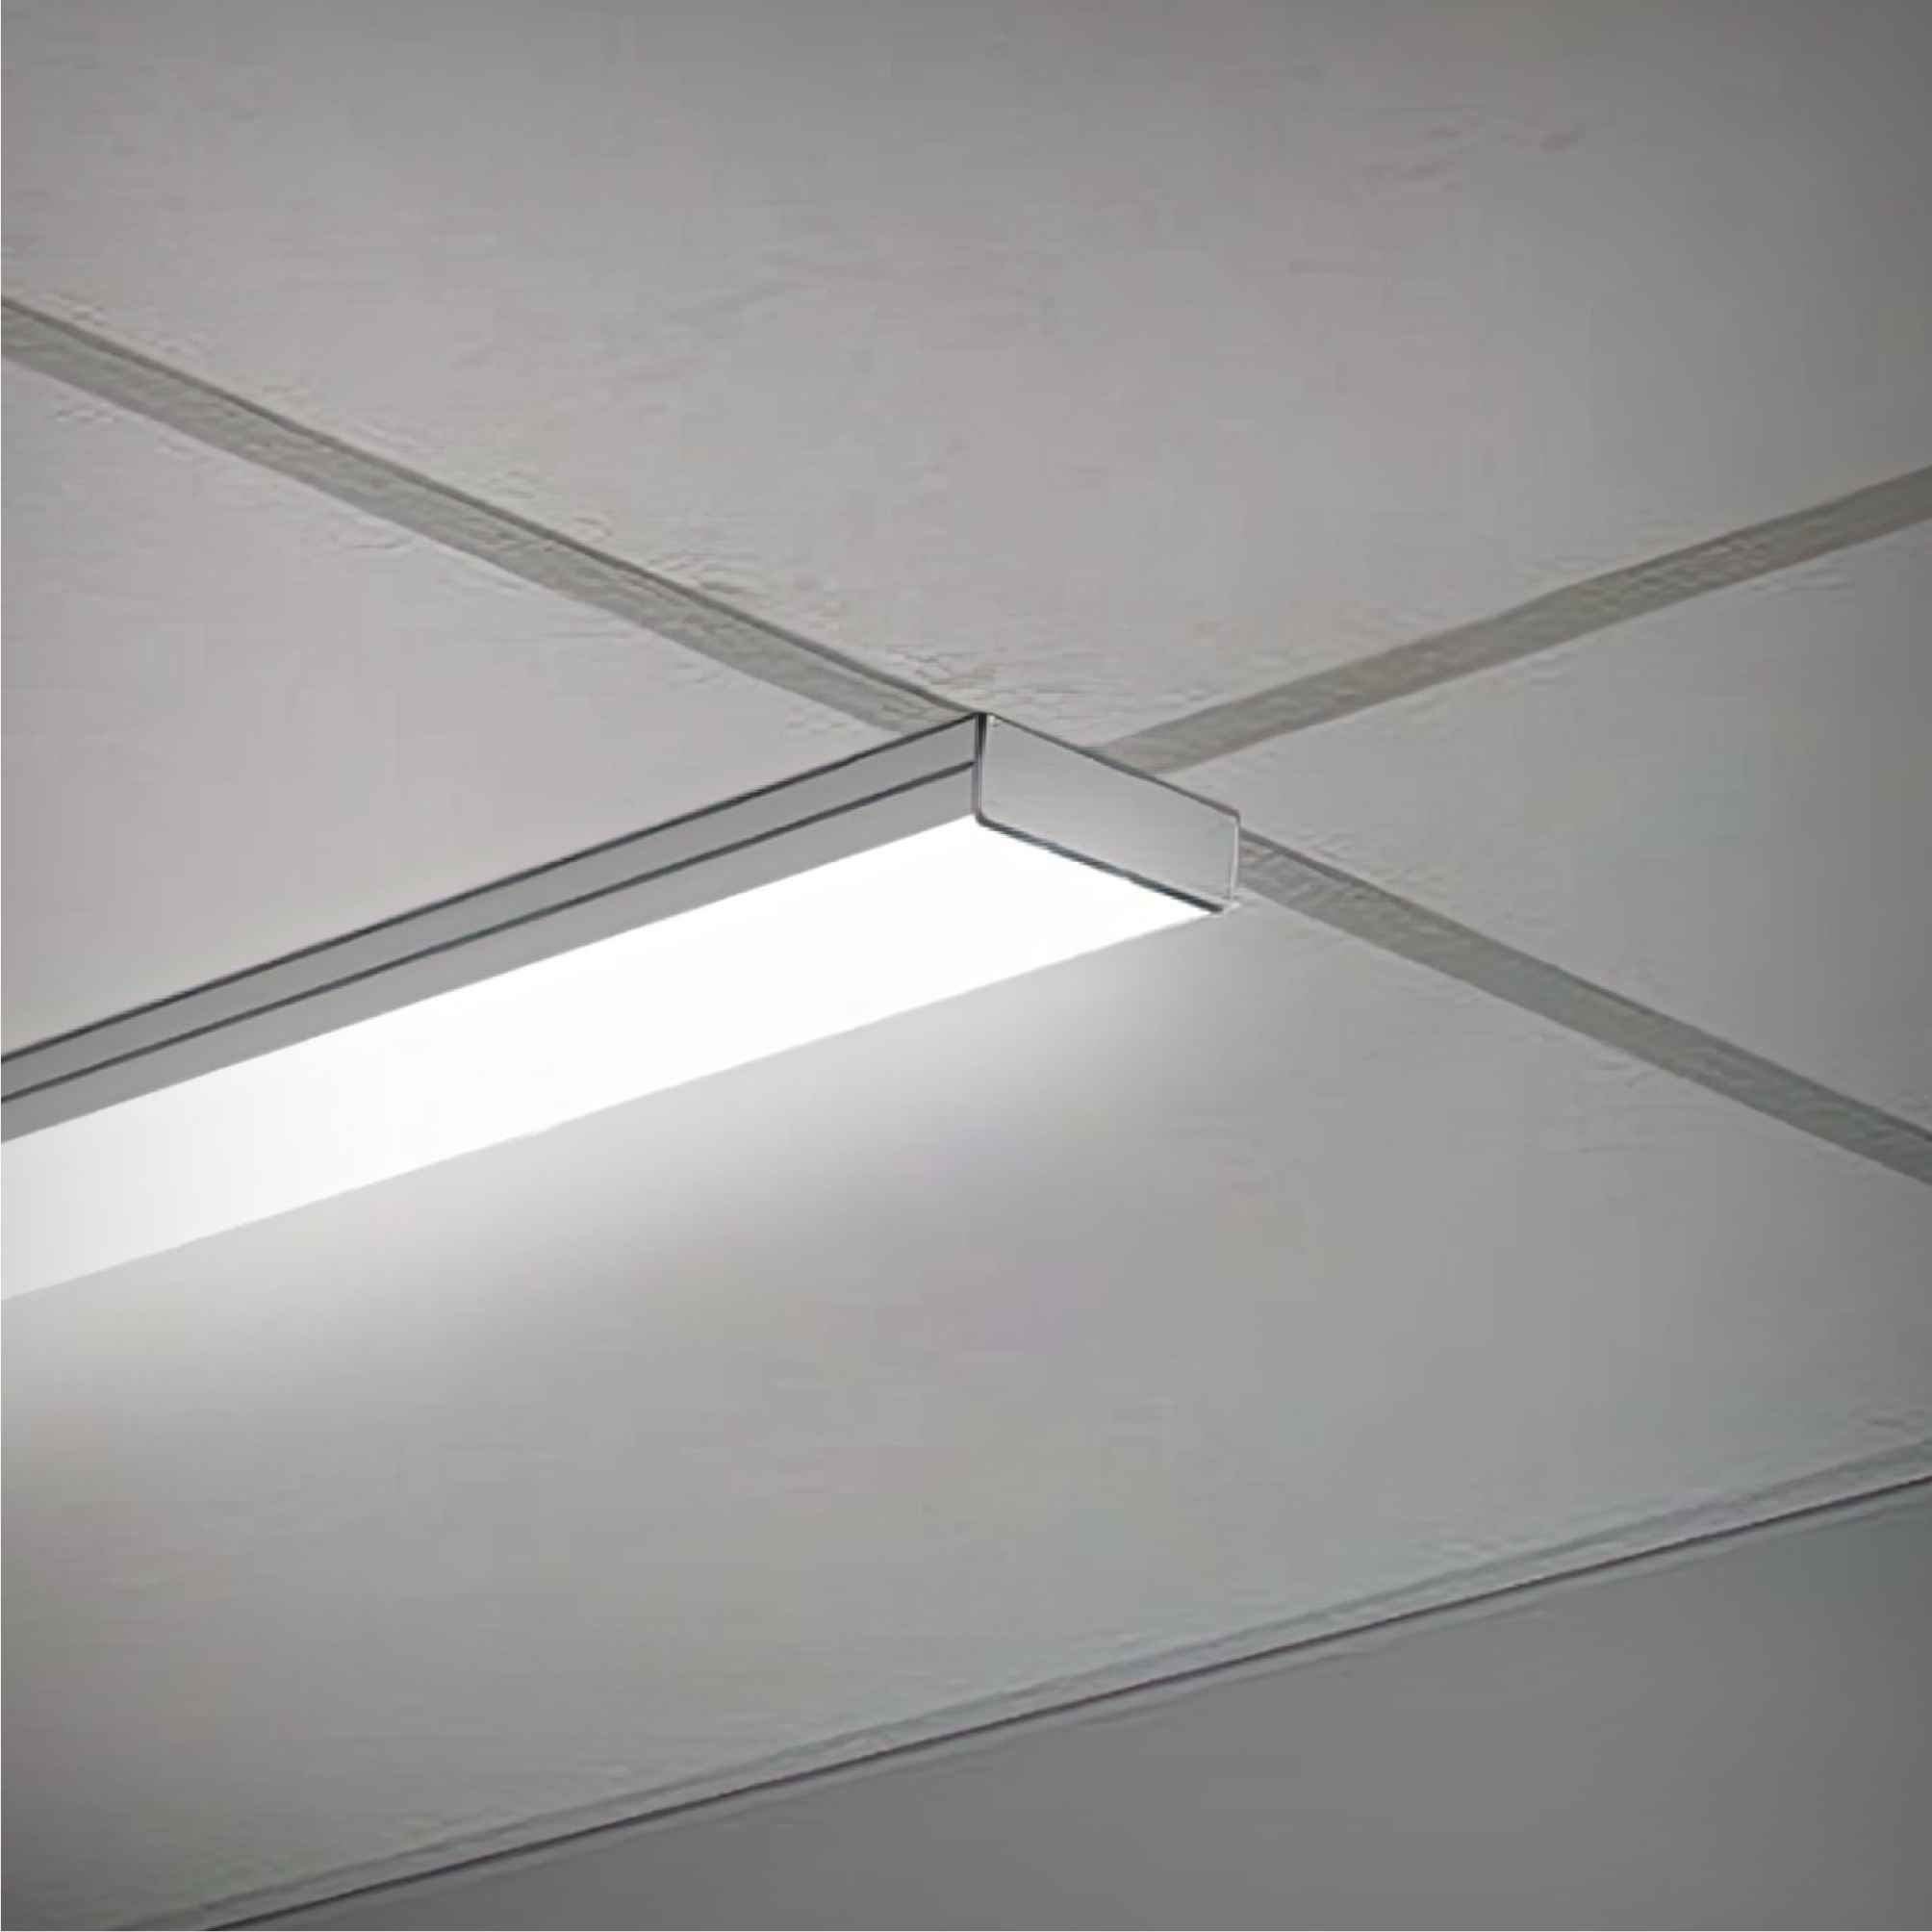 Low-profile Linear LED T-Bar Grid Ceiling Light with a 1.75-Inch profile